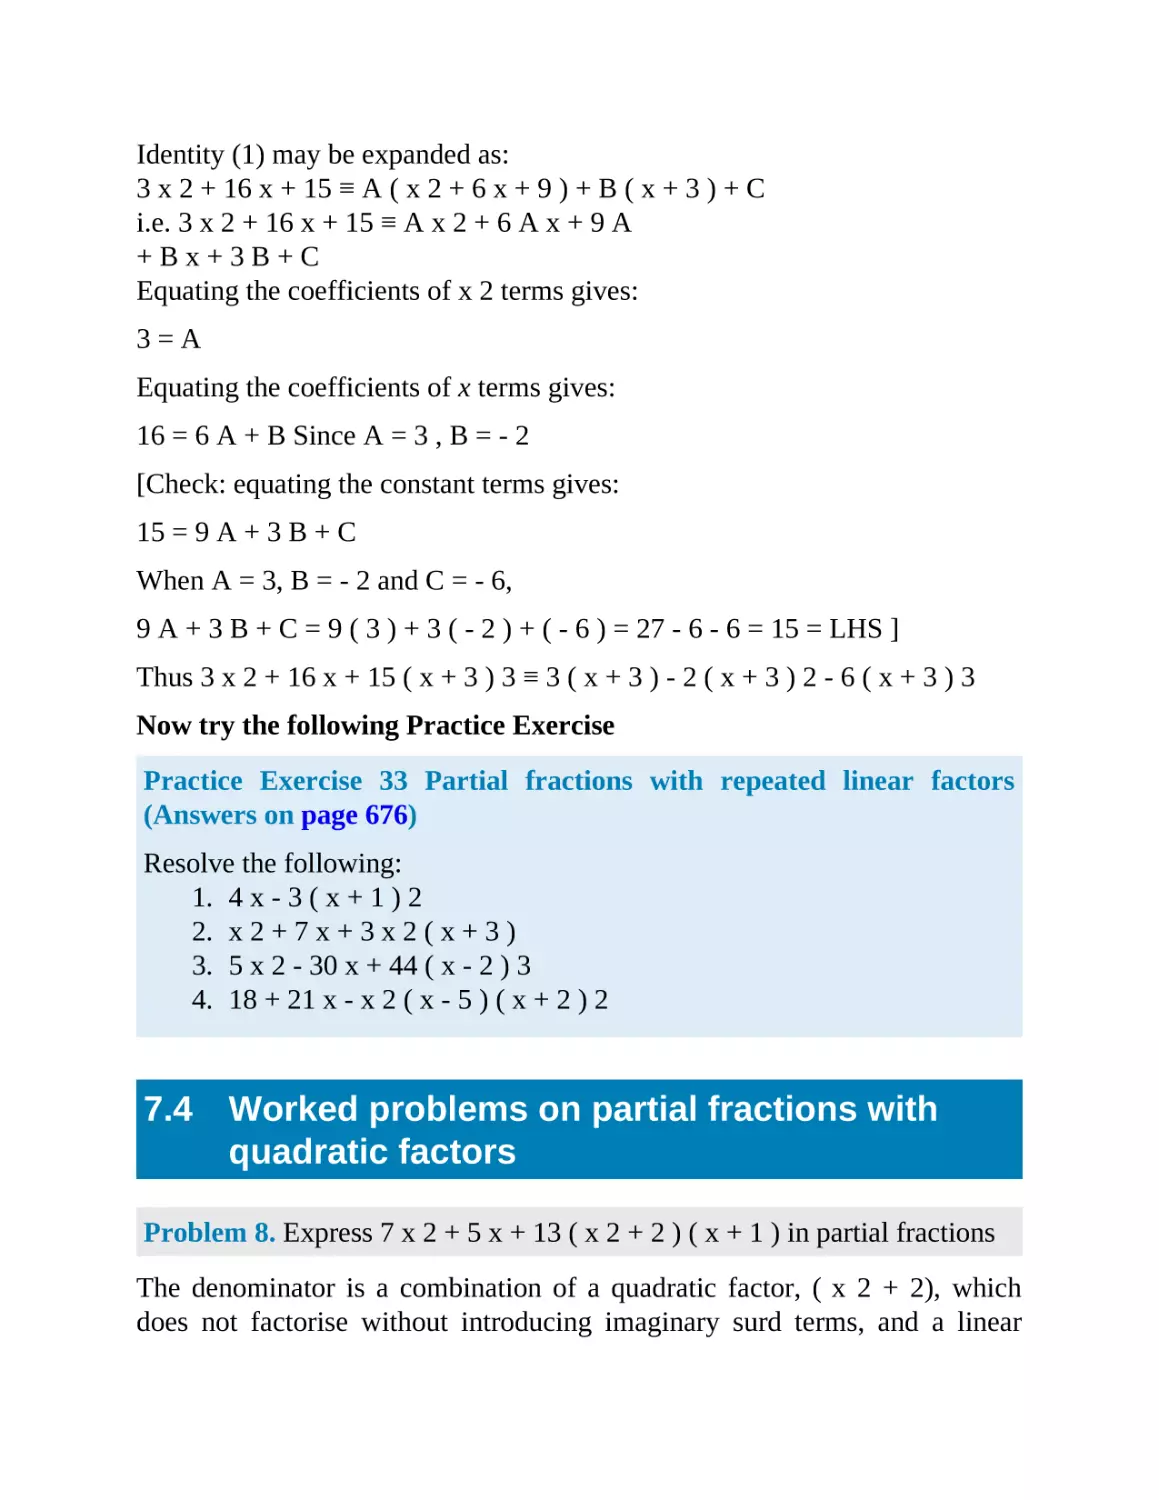 7.4 Worked problems on partial fractions with quadratic factors